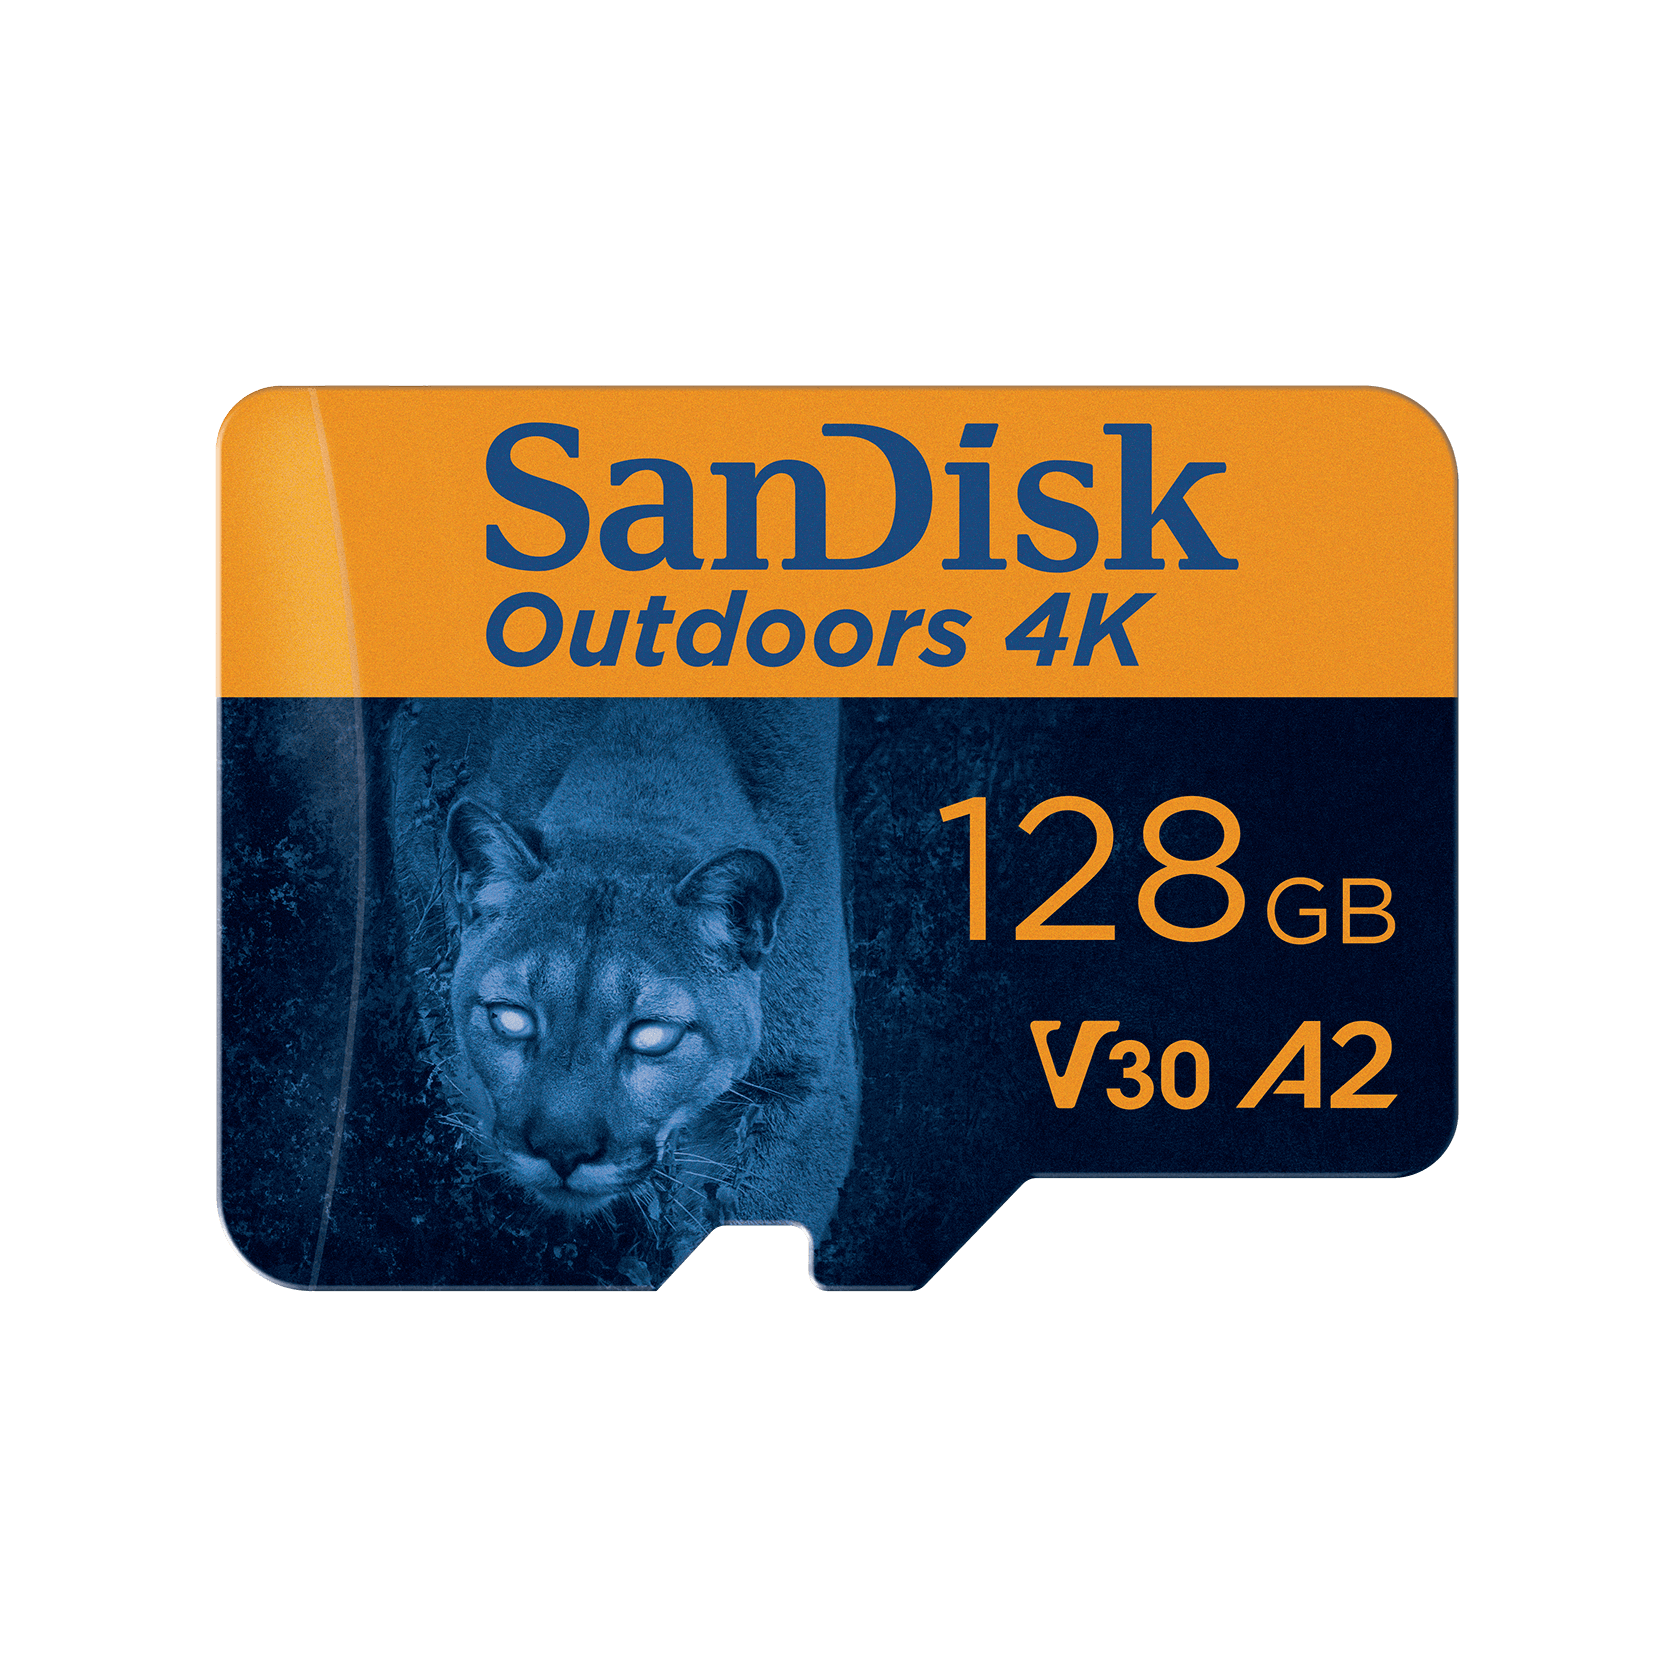 SanDisk Outdoors 4K MicroSDXC UHS-I Card With SD Adapter - 128GB Two Pack - SDSQXAA-128G-GN6VT